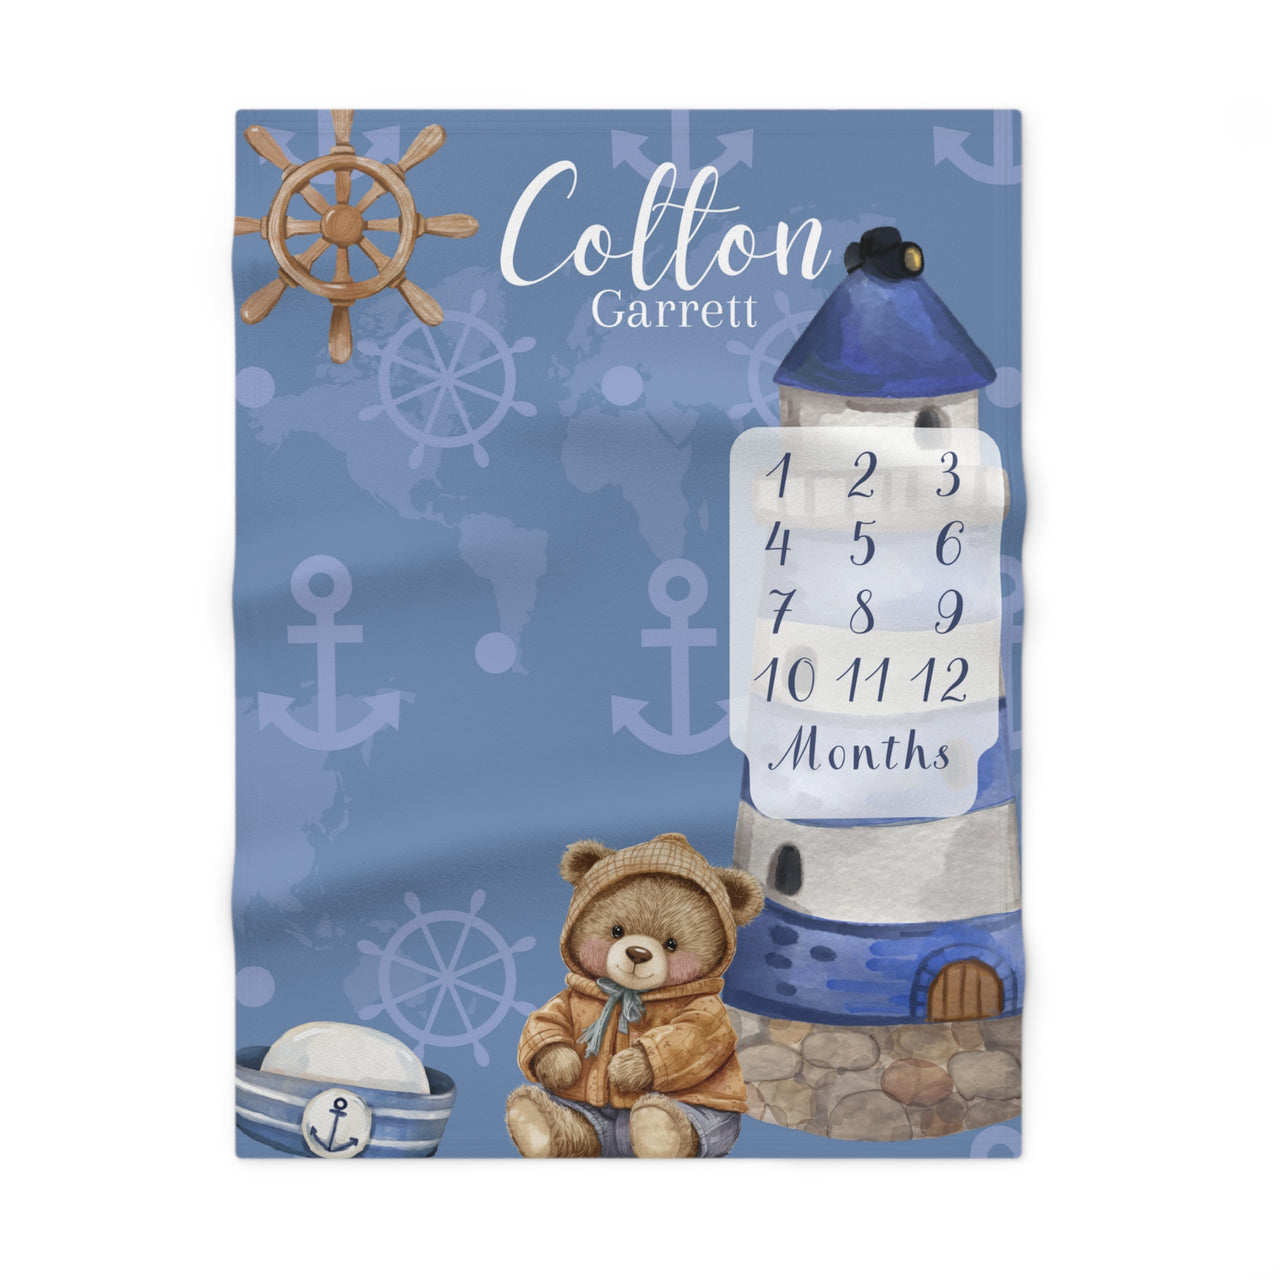 Nautical Bear Themed Soft Fleece Milestone Blanket, Boys Monthly Growth Tracker, Personalized Baby Blanket, Baby Shower Gift